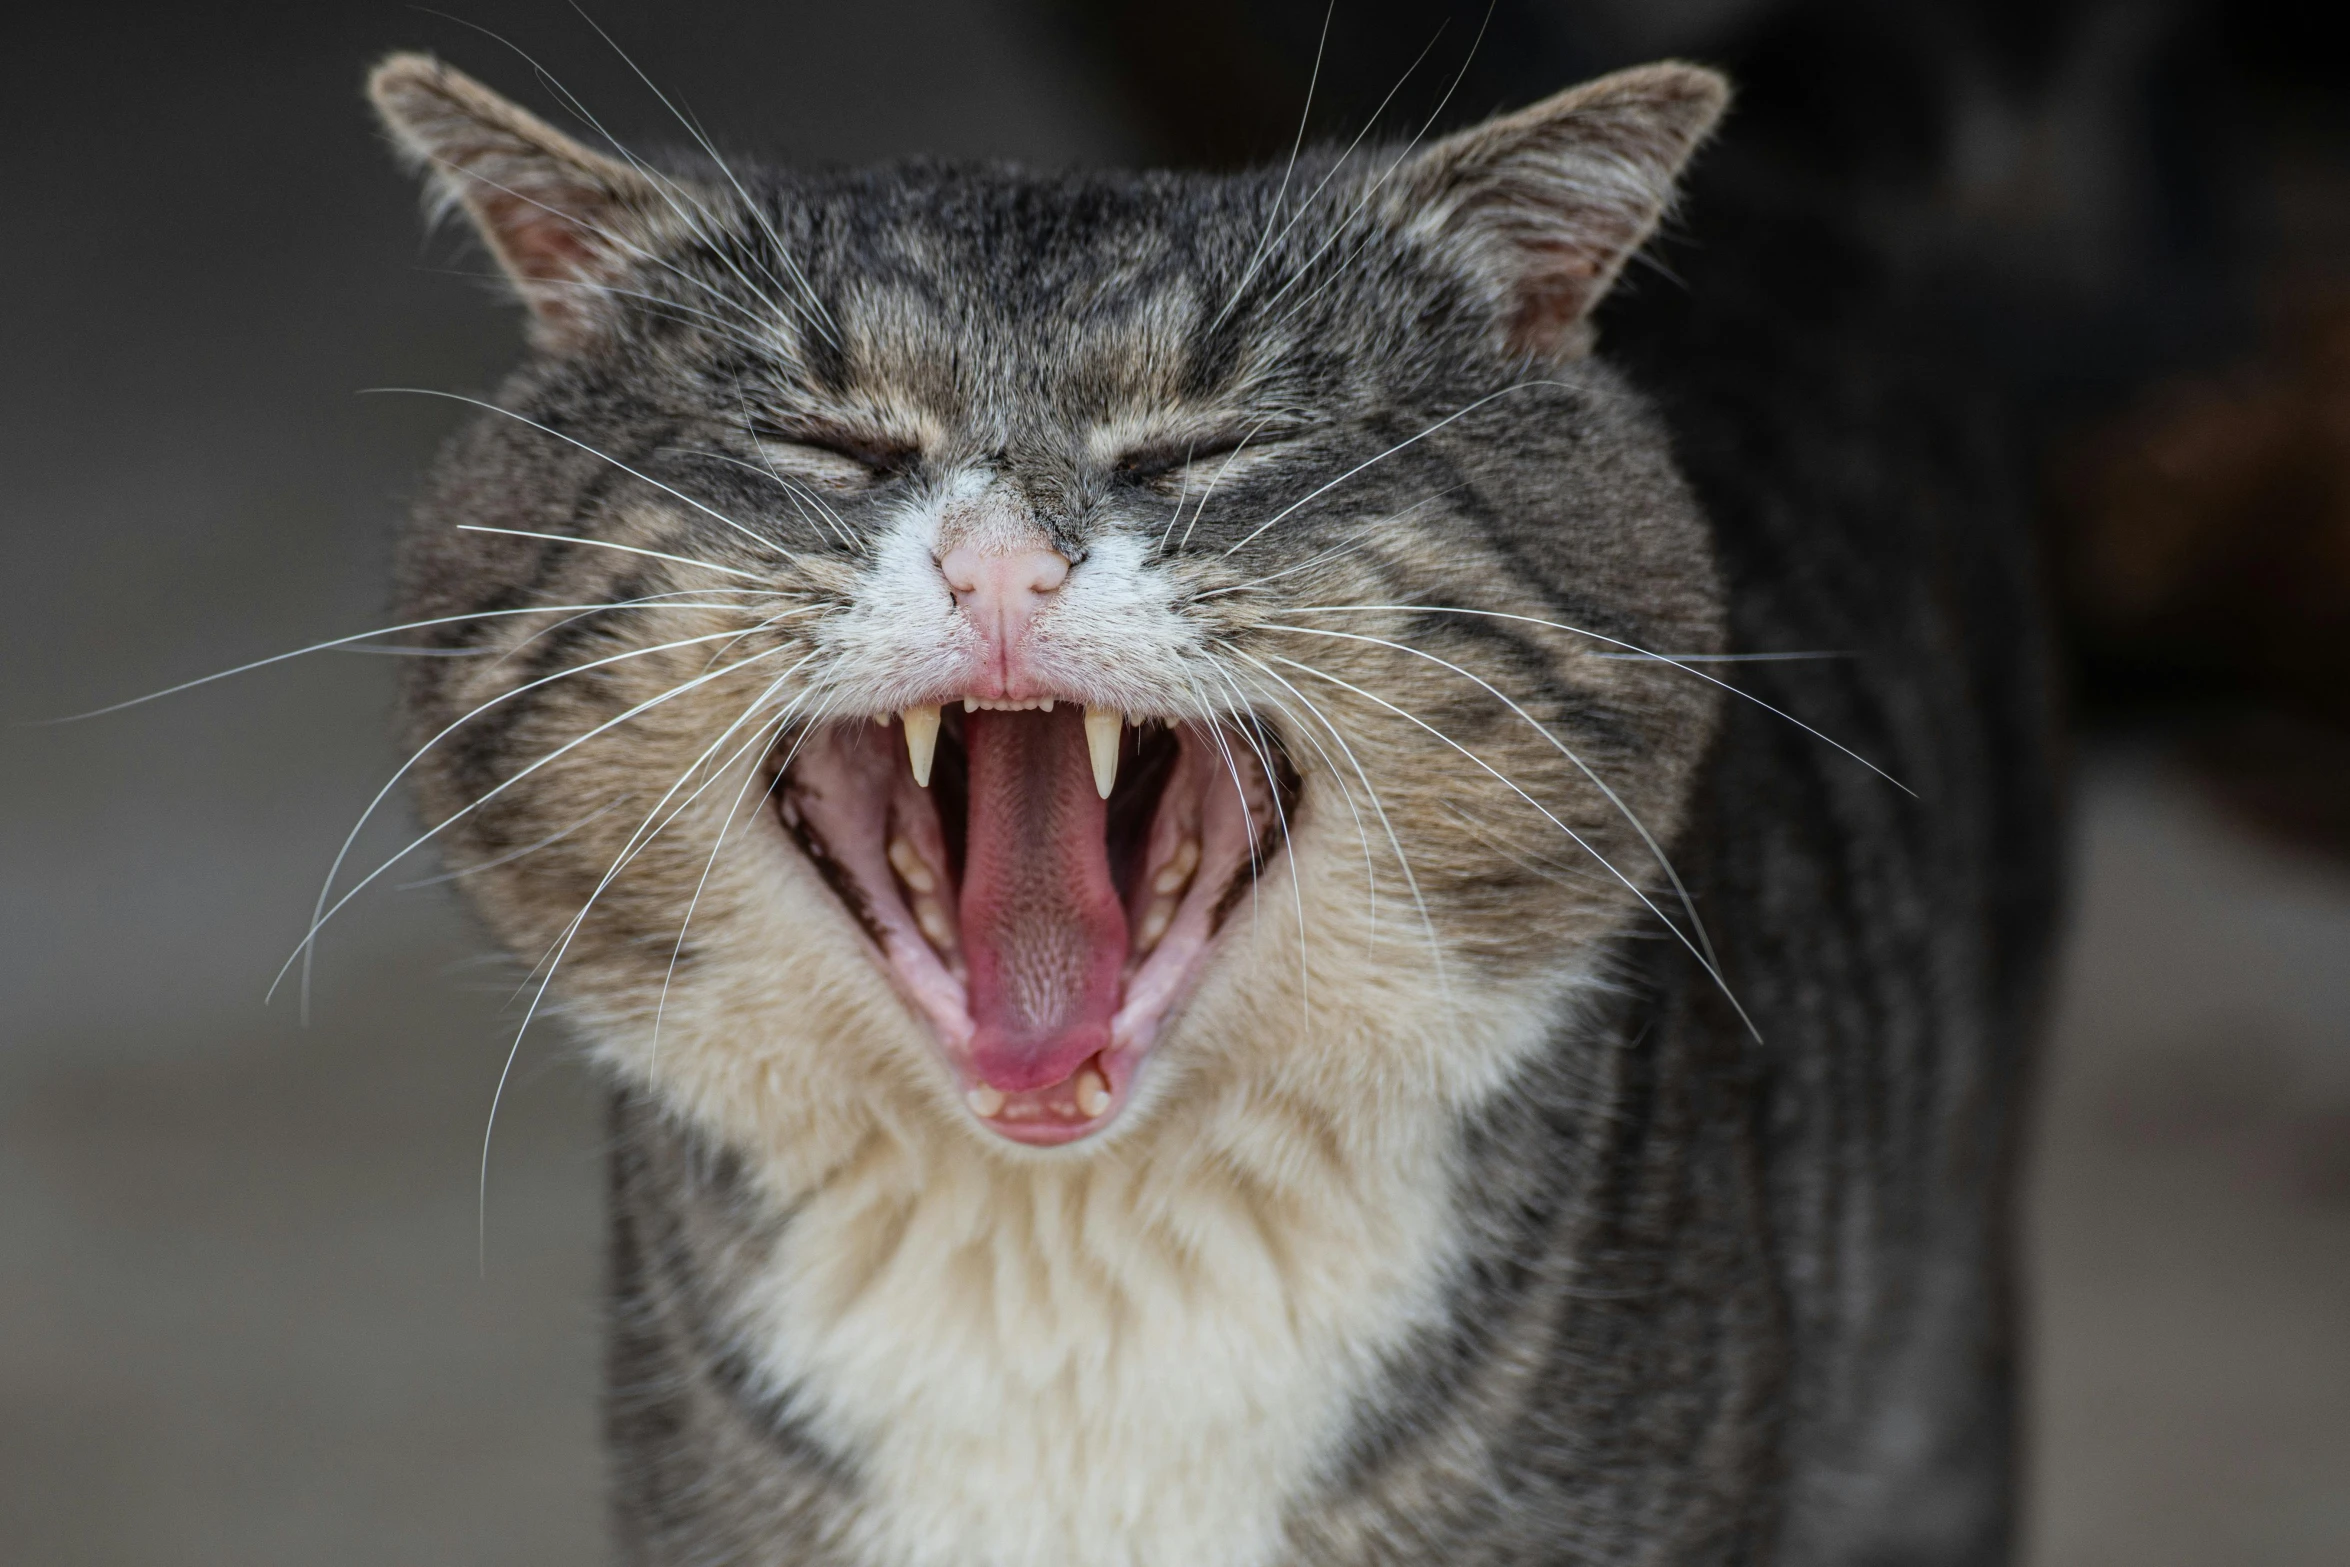 a cat is taking a silly face while growling